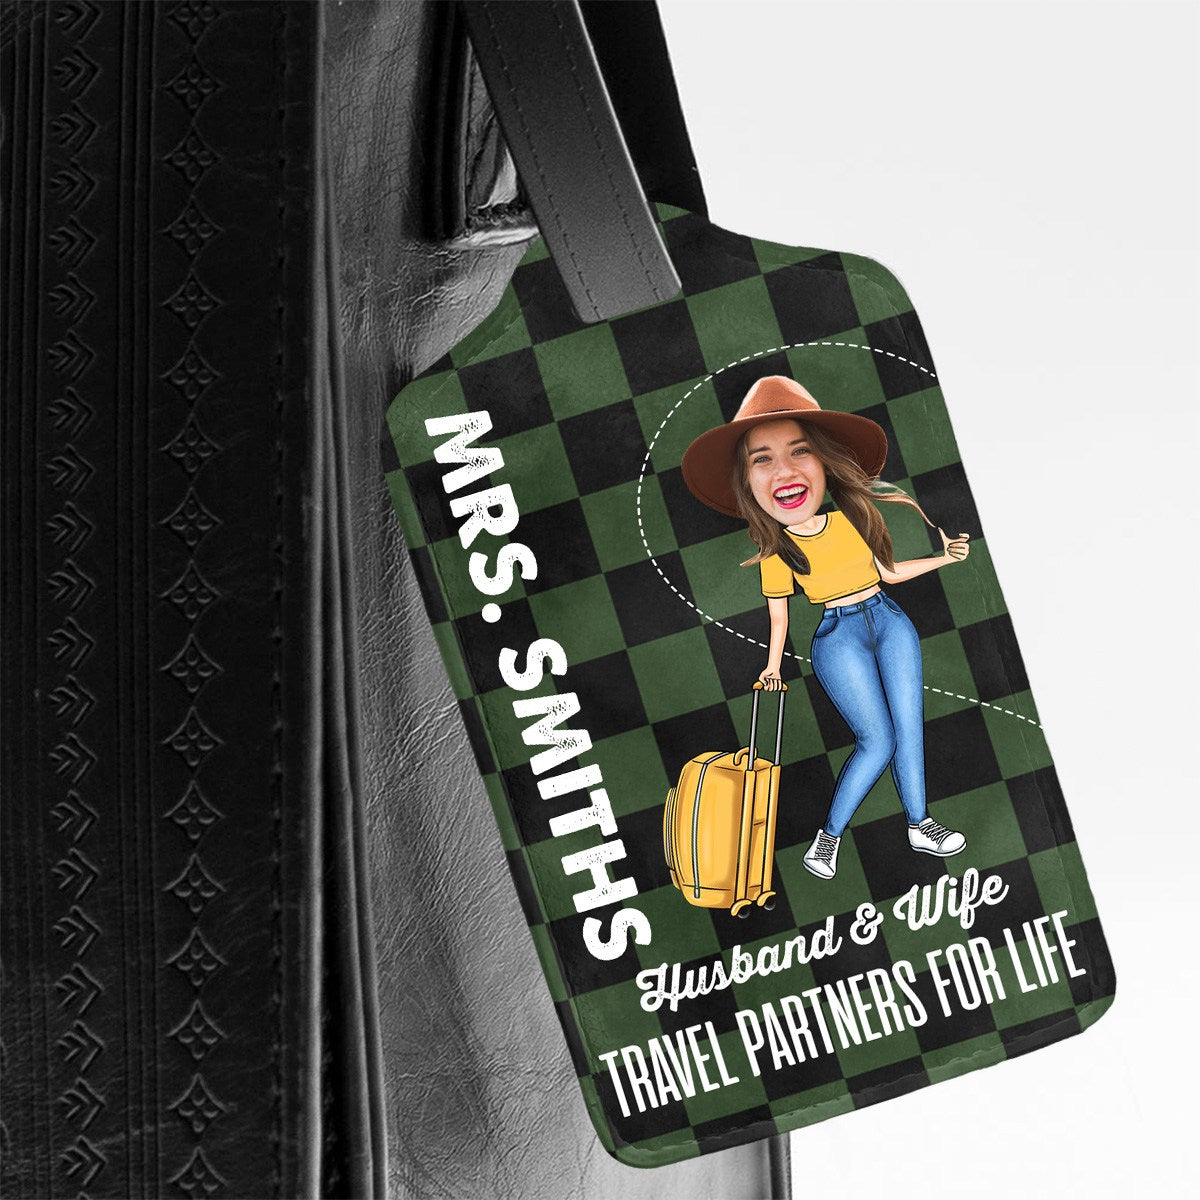 Family - Husband & Wife Travel Partners For Life - Personalized Luggage Tag